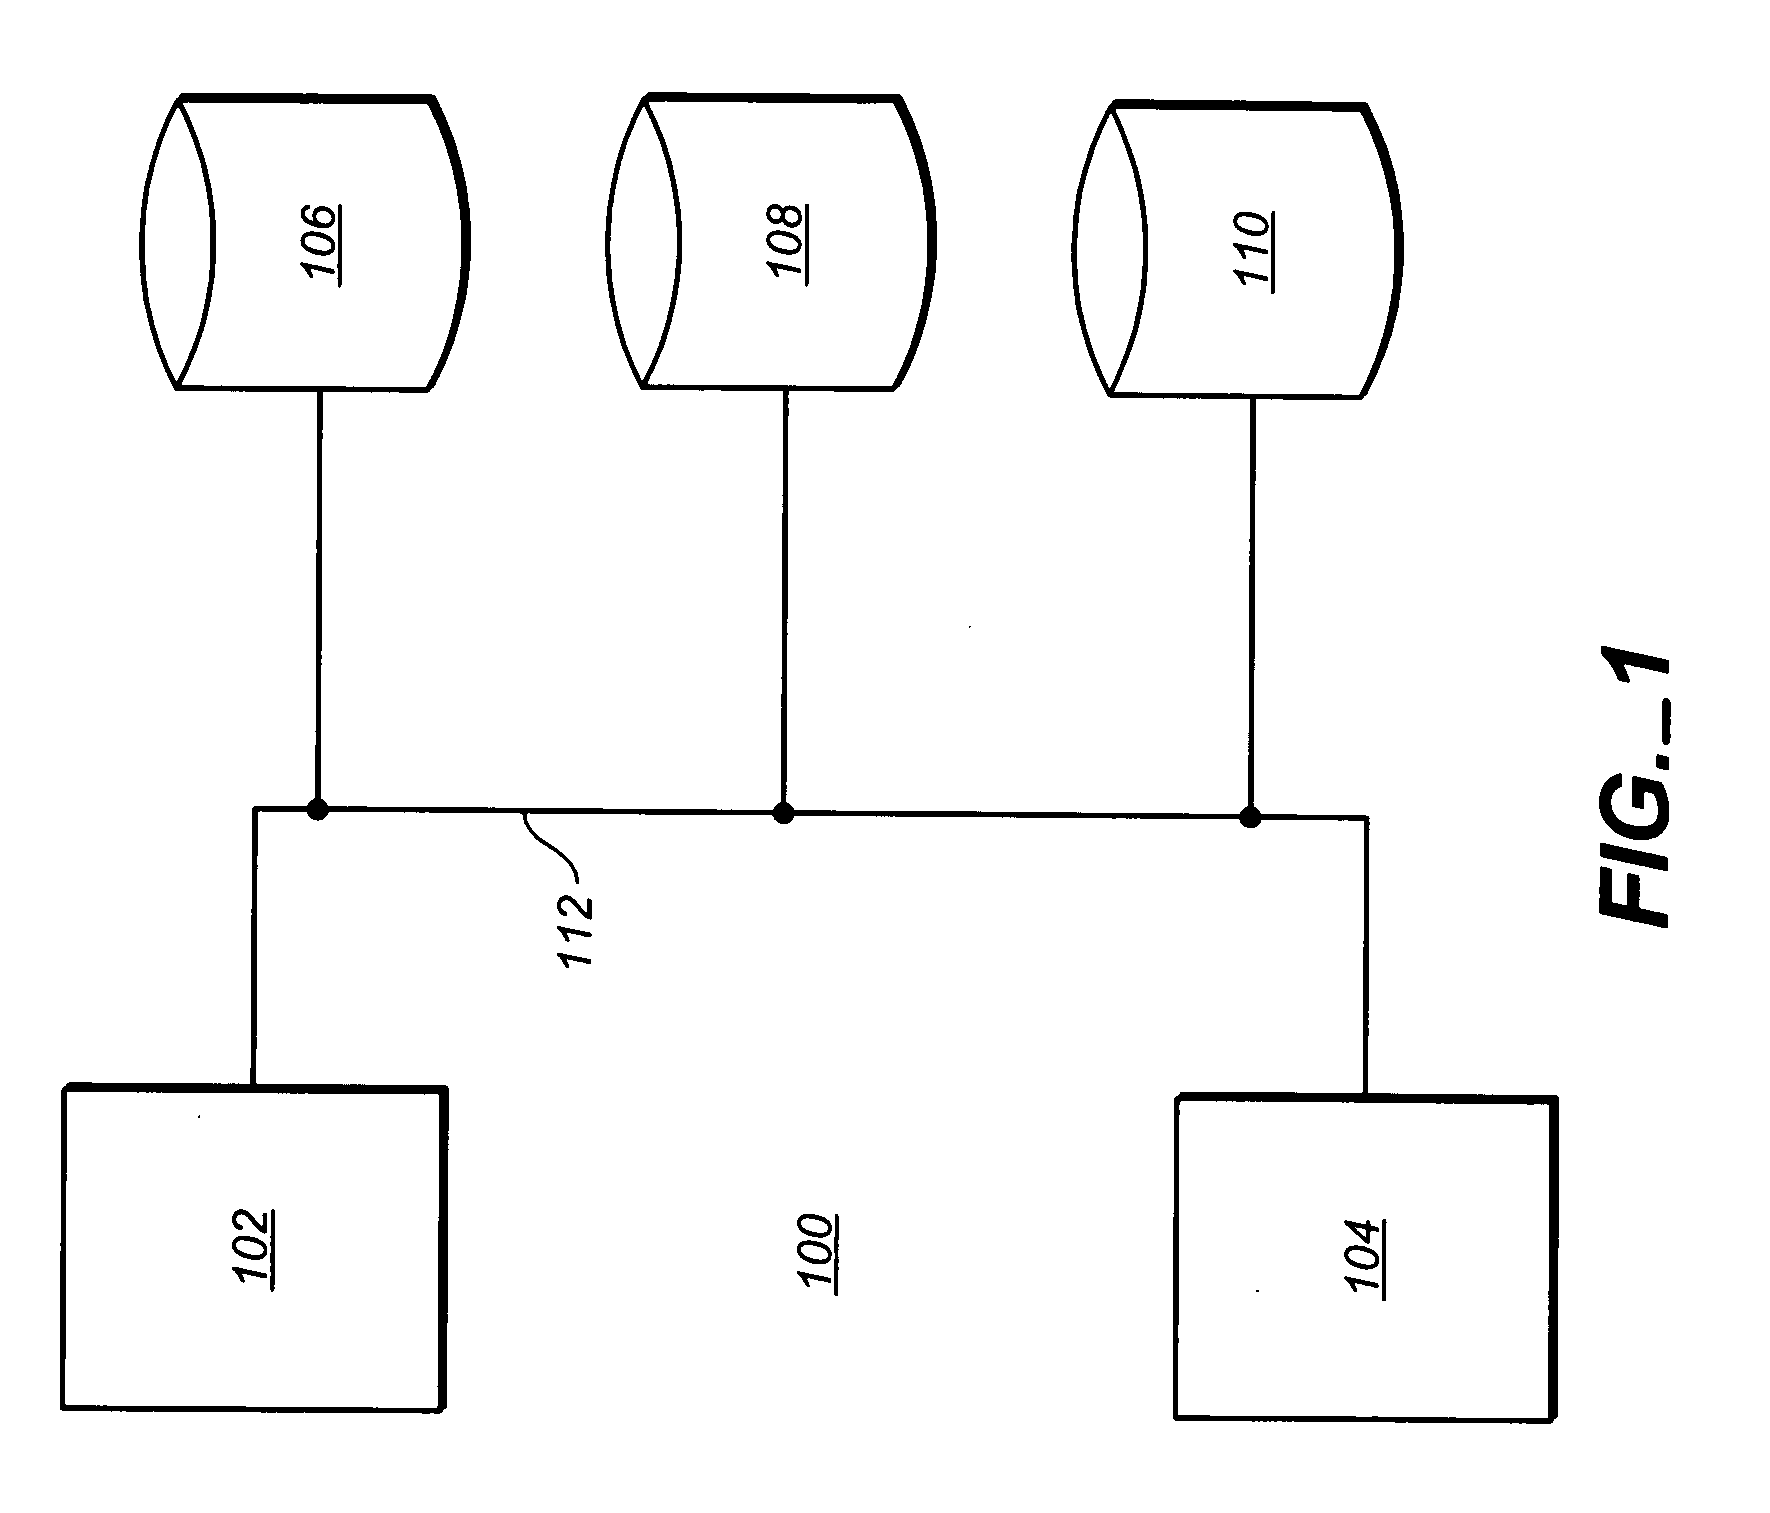 FIFO sub-system with in-line correction